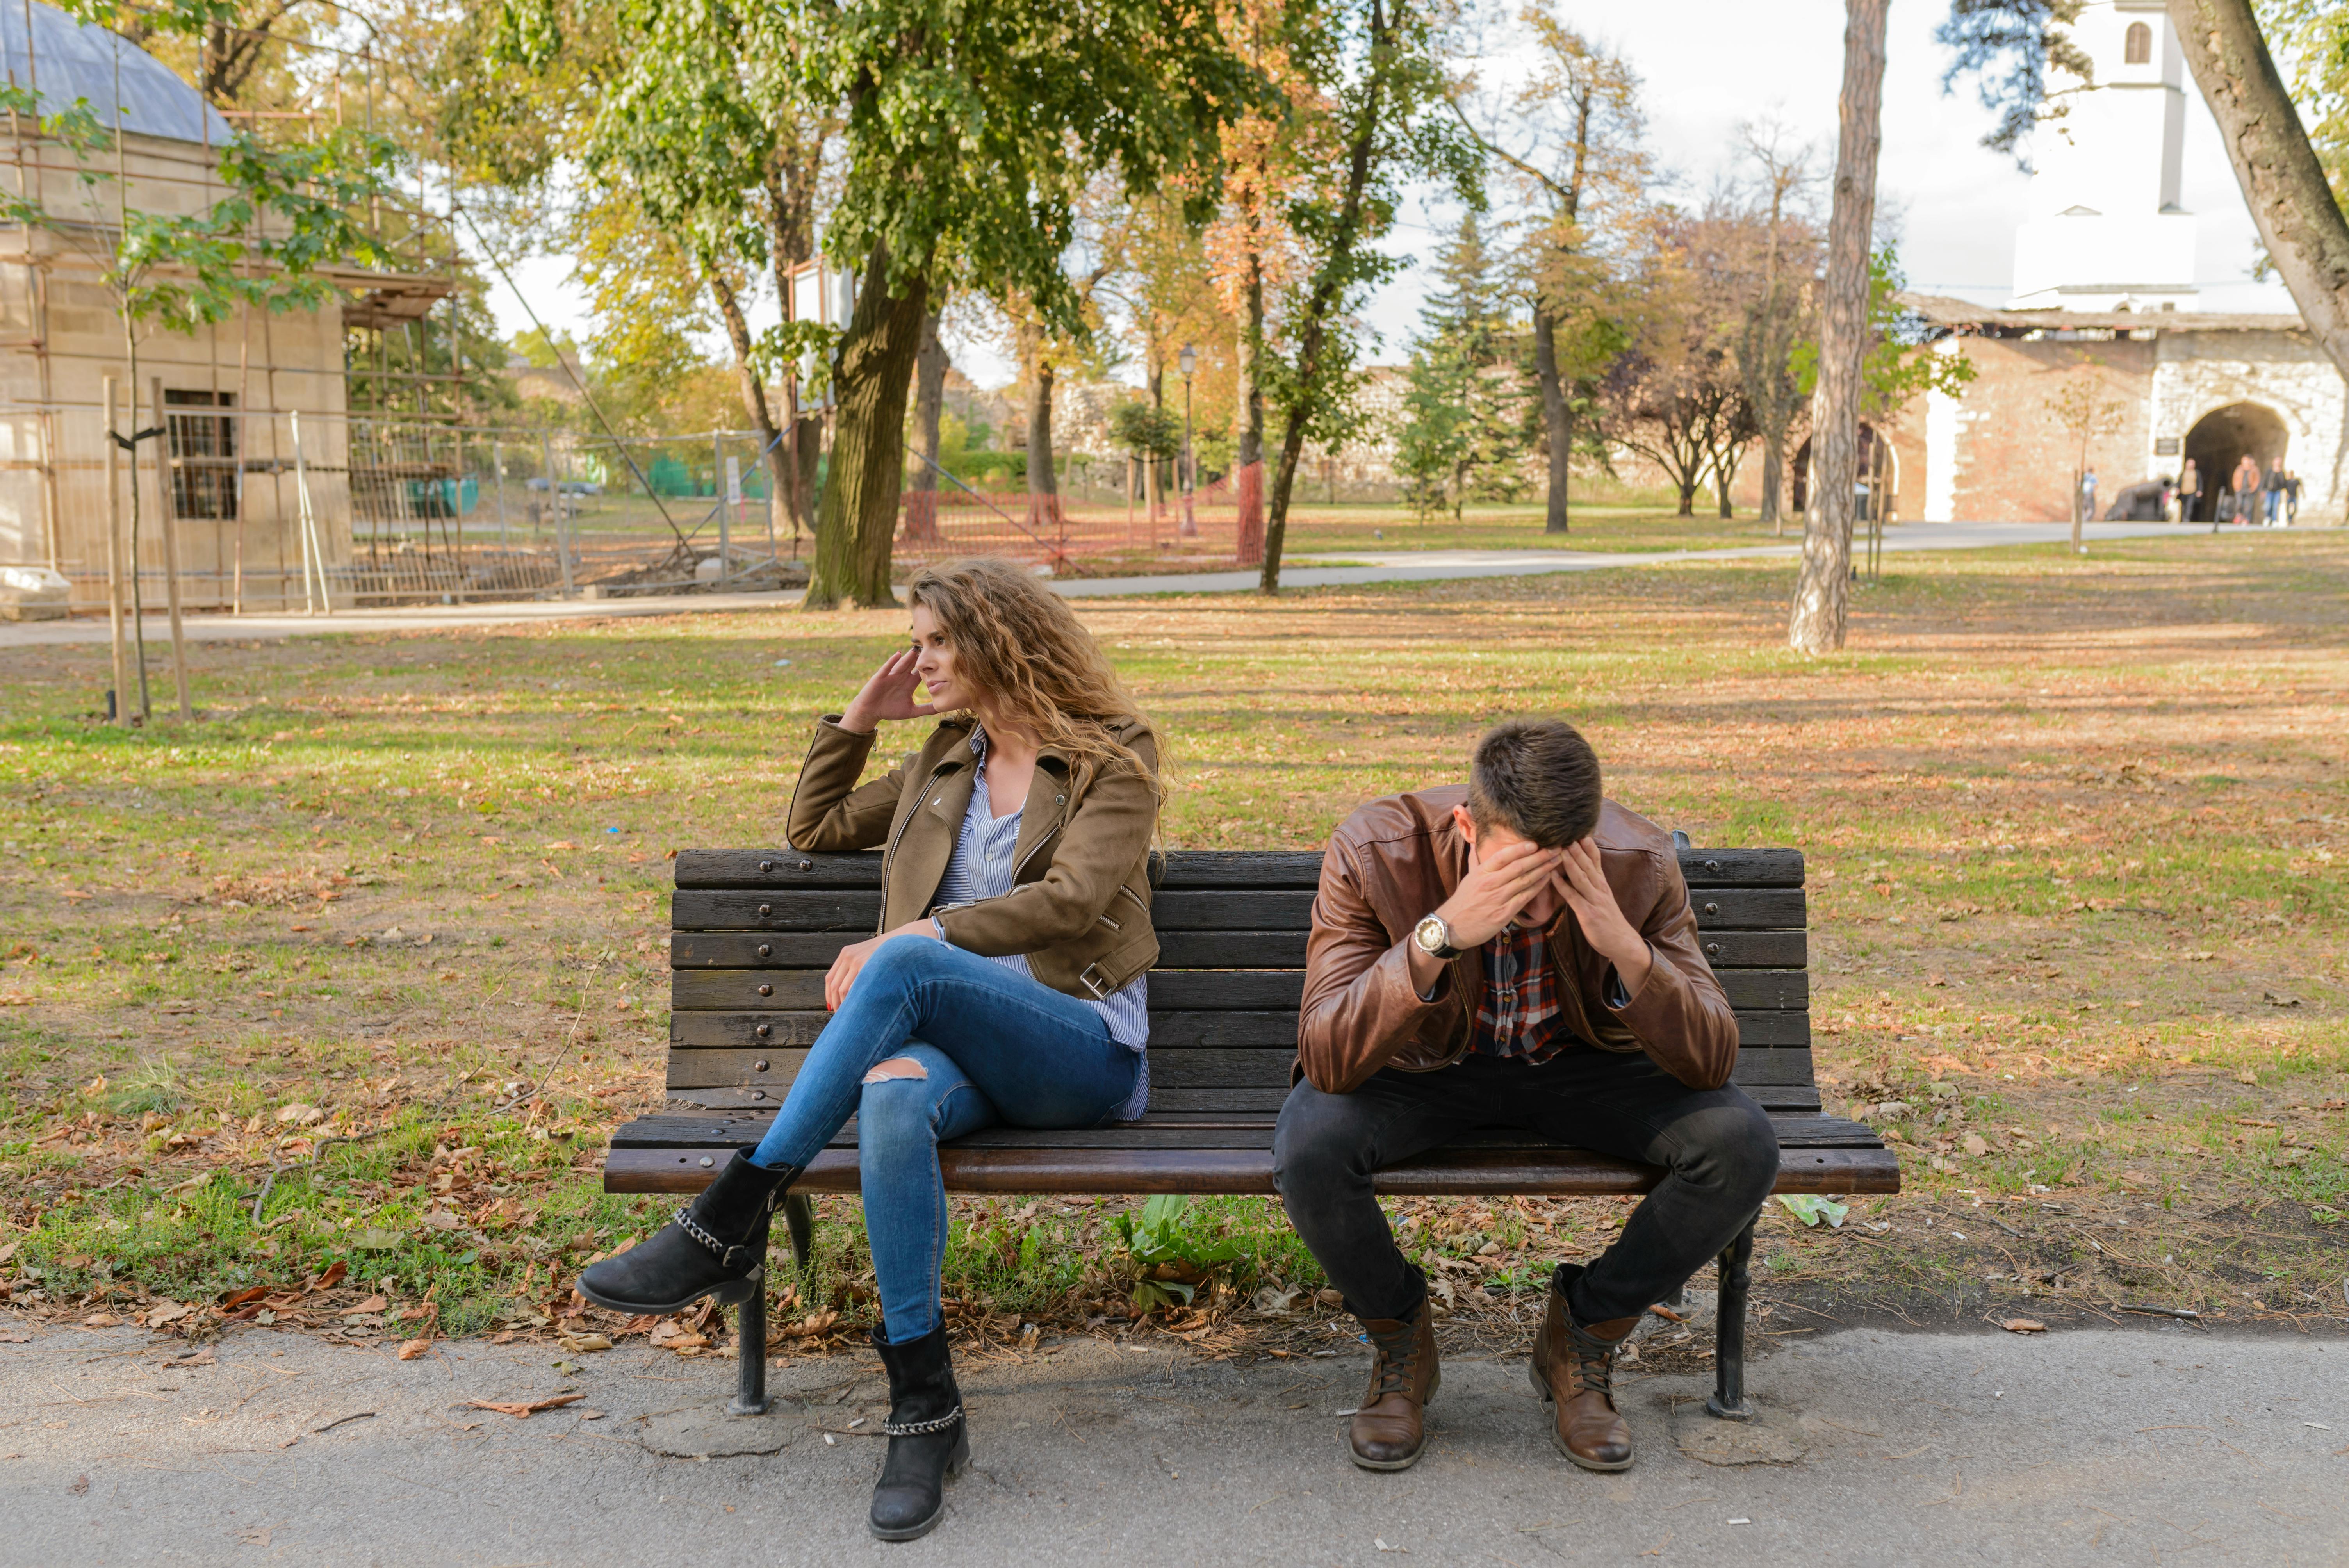 Couple sitting on a wooden bench. | Photo: Pexels